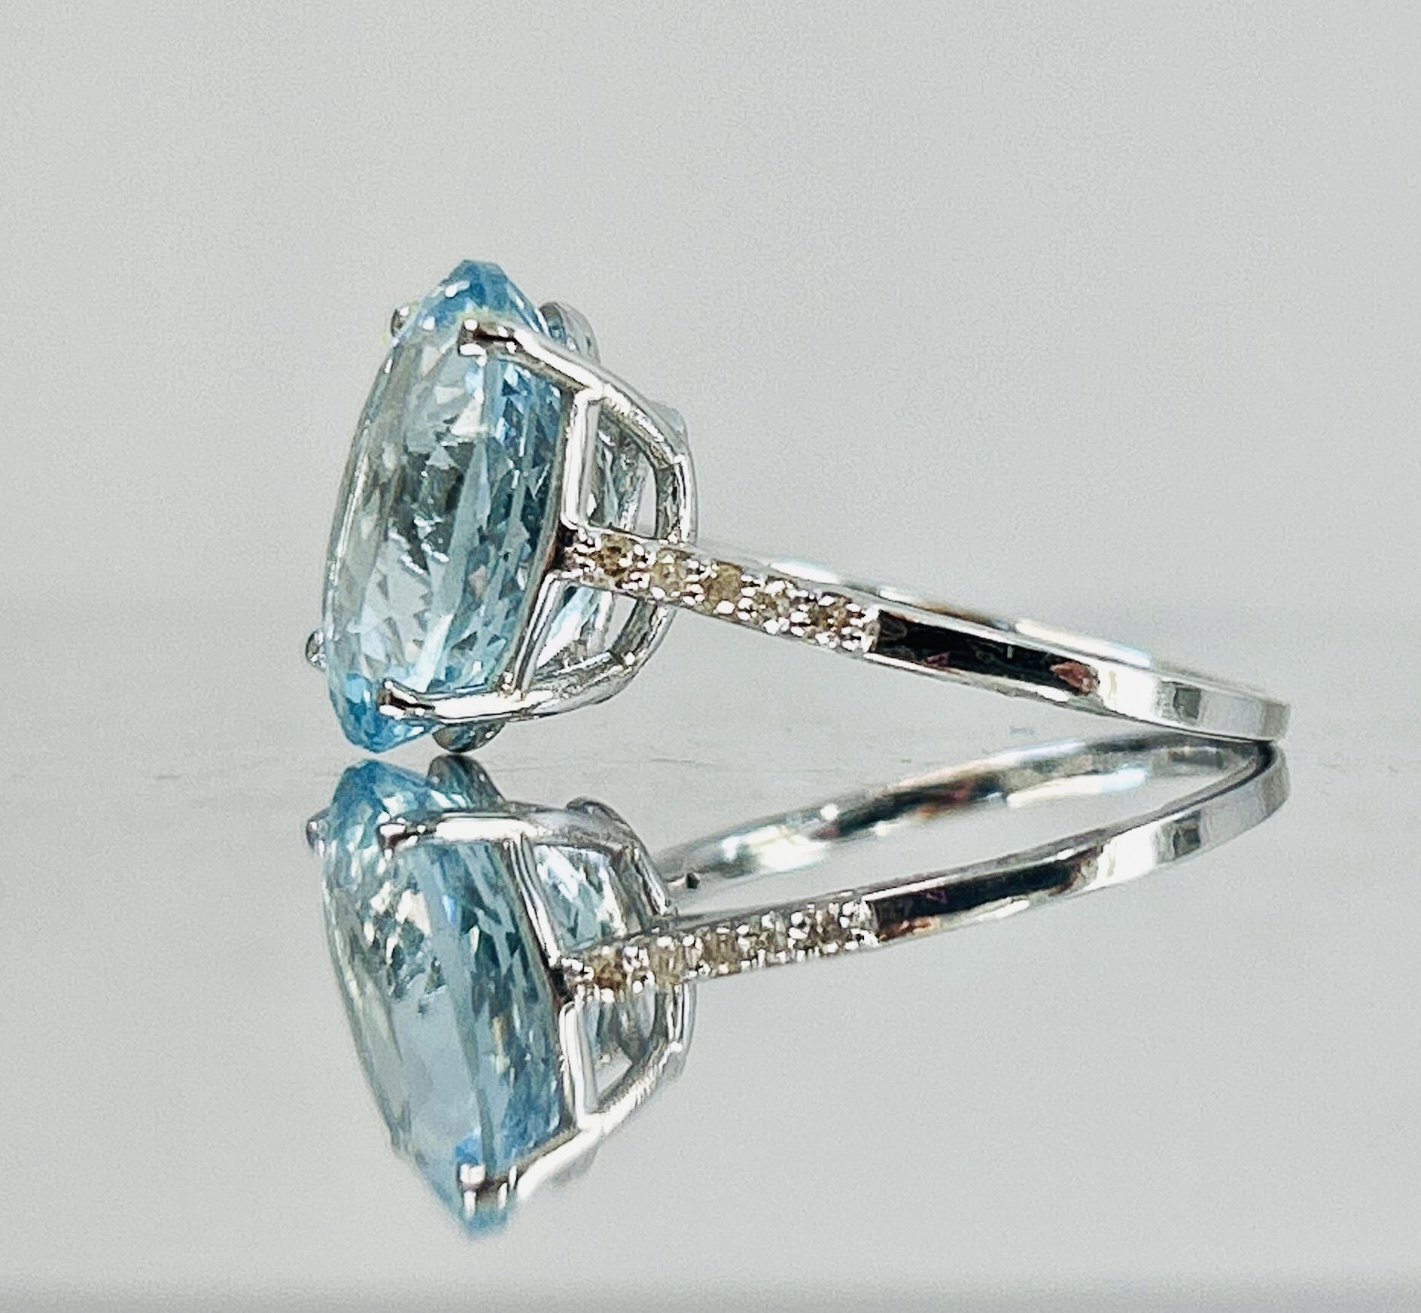 Beautiful Natural Flawless 5.81CT Aquamarine Ring With Diamonds And 18k Gold - Image 3 of 6